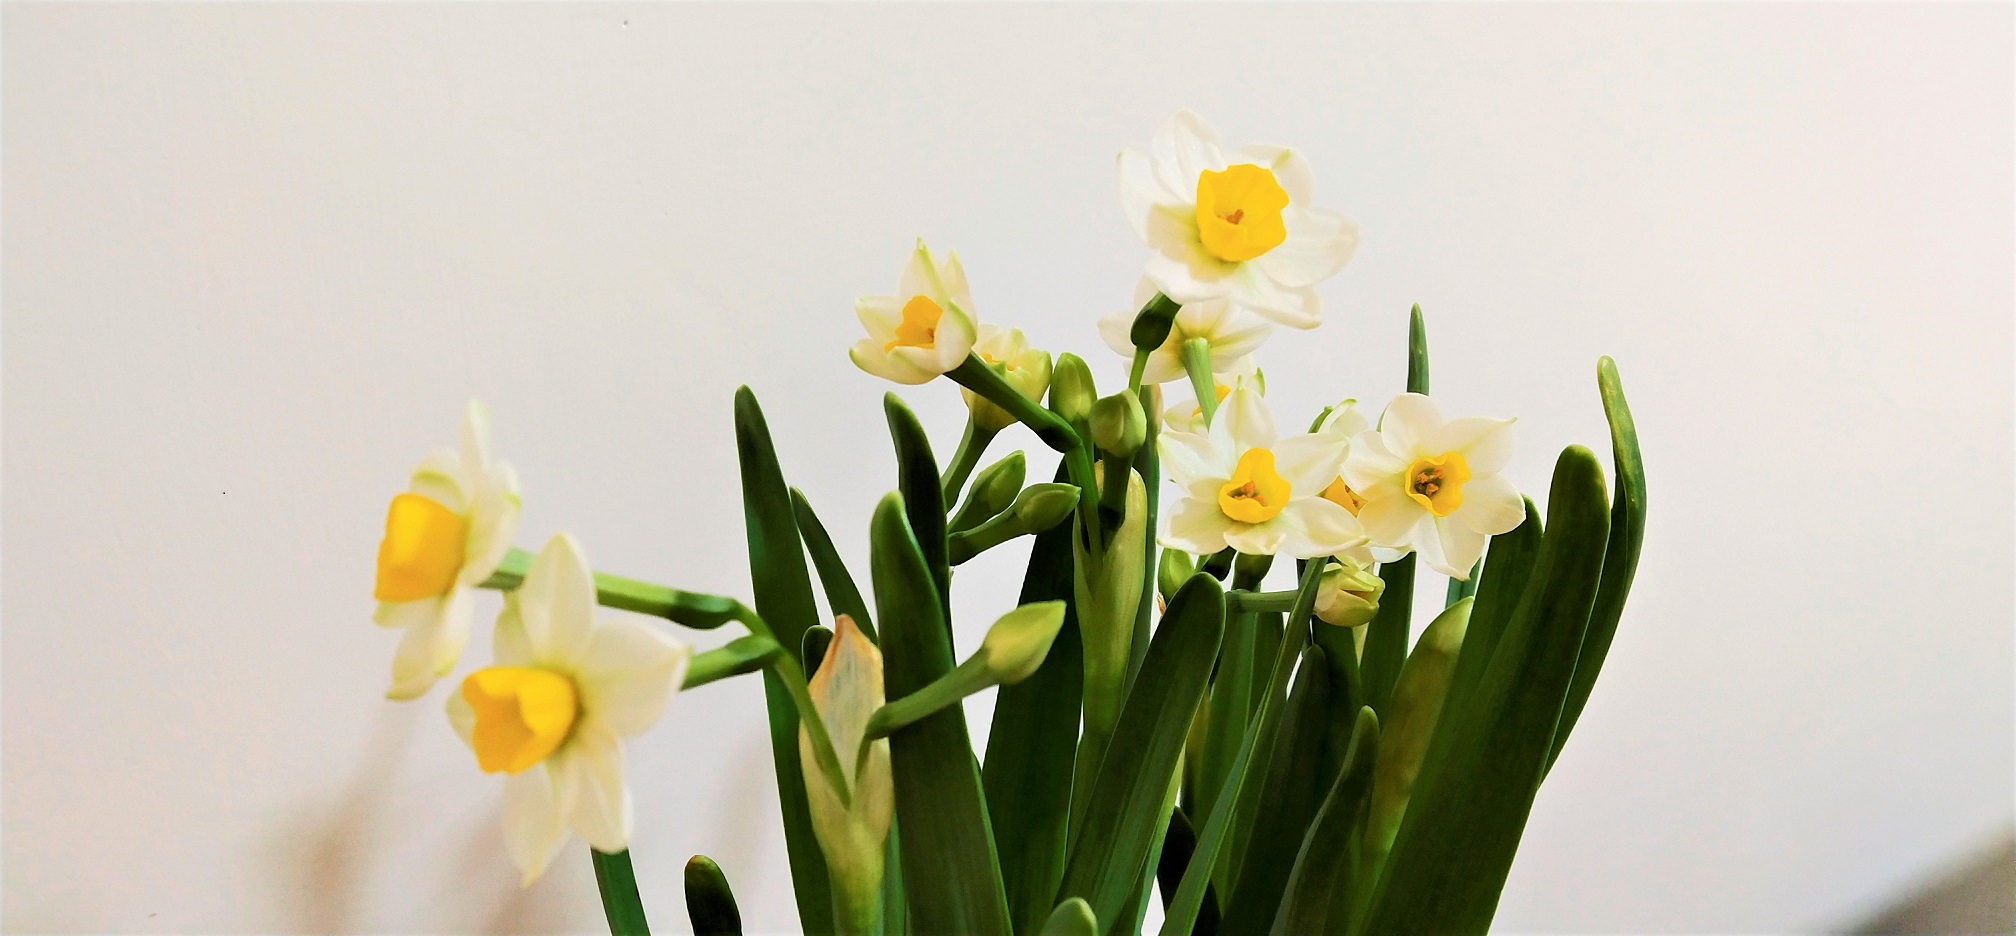 Narcissus is a popular flower for Chinese New Year.